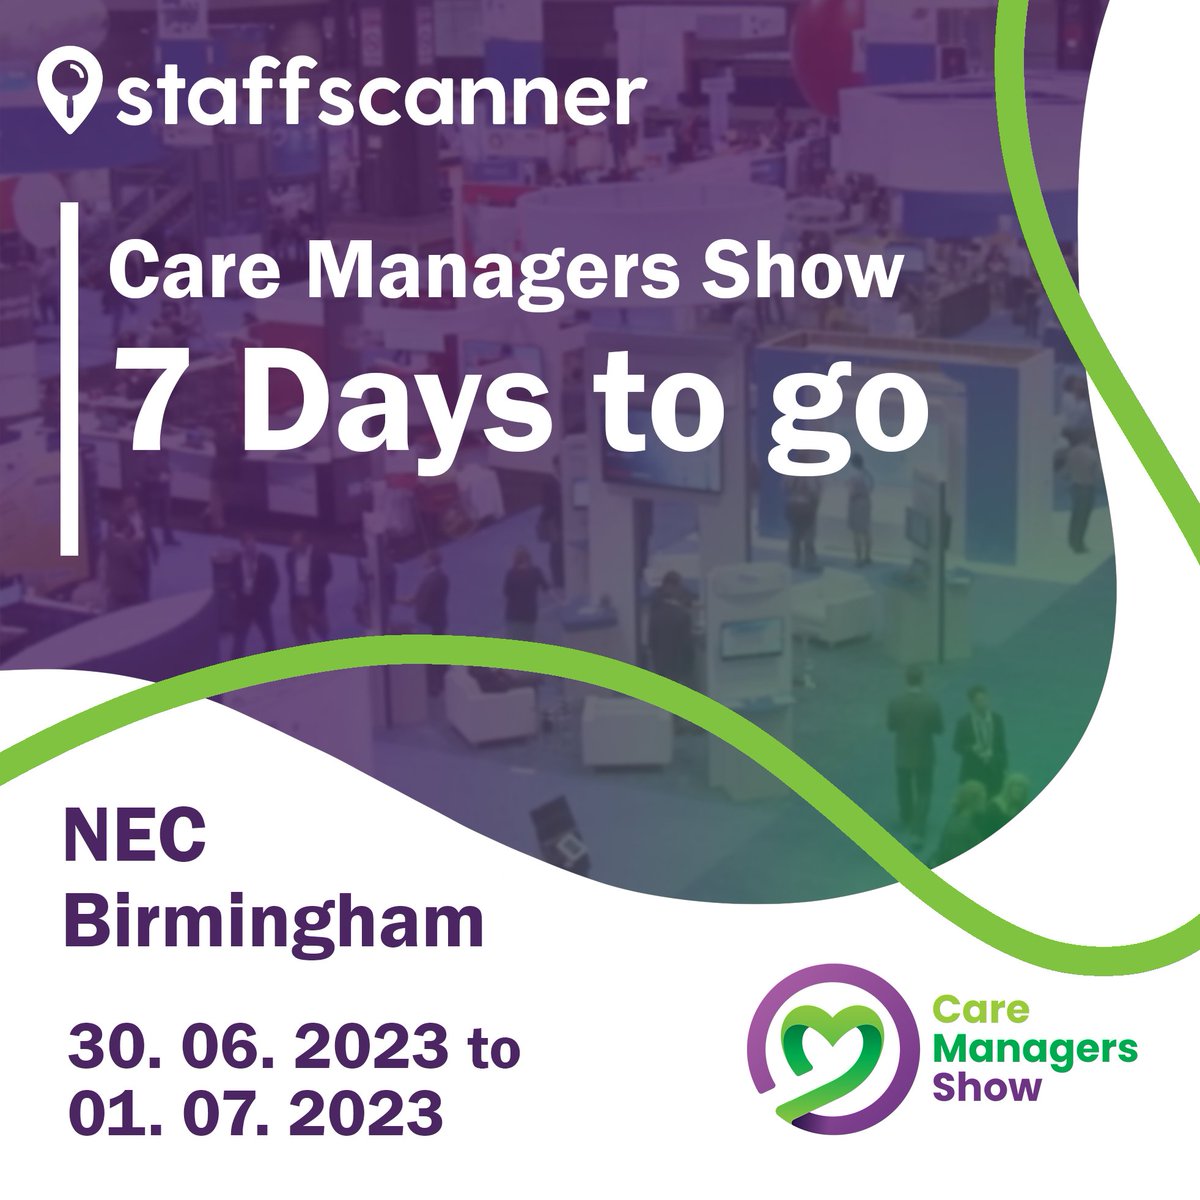 We are attending the Care Managers Show @thenec  from 30th June to 1st July 2023 hosted by @Caring_Times.

#carersuk #carers #nurses #nursesuk #healthandsocialcare #healthcare #staffscanner #carehomes #carehomesuk #caregroups #connection  #care #experience #CareManagersShow